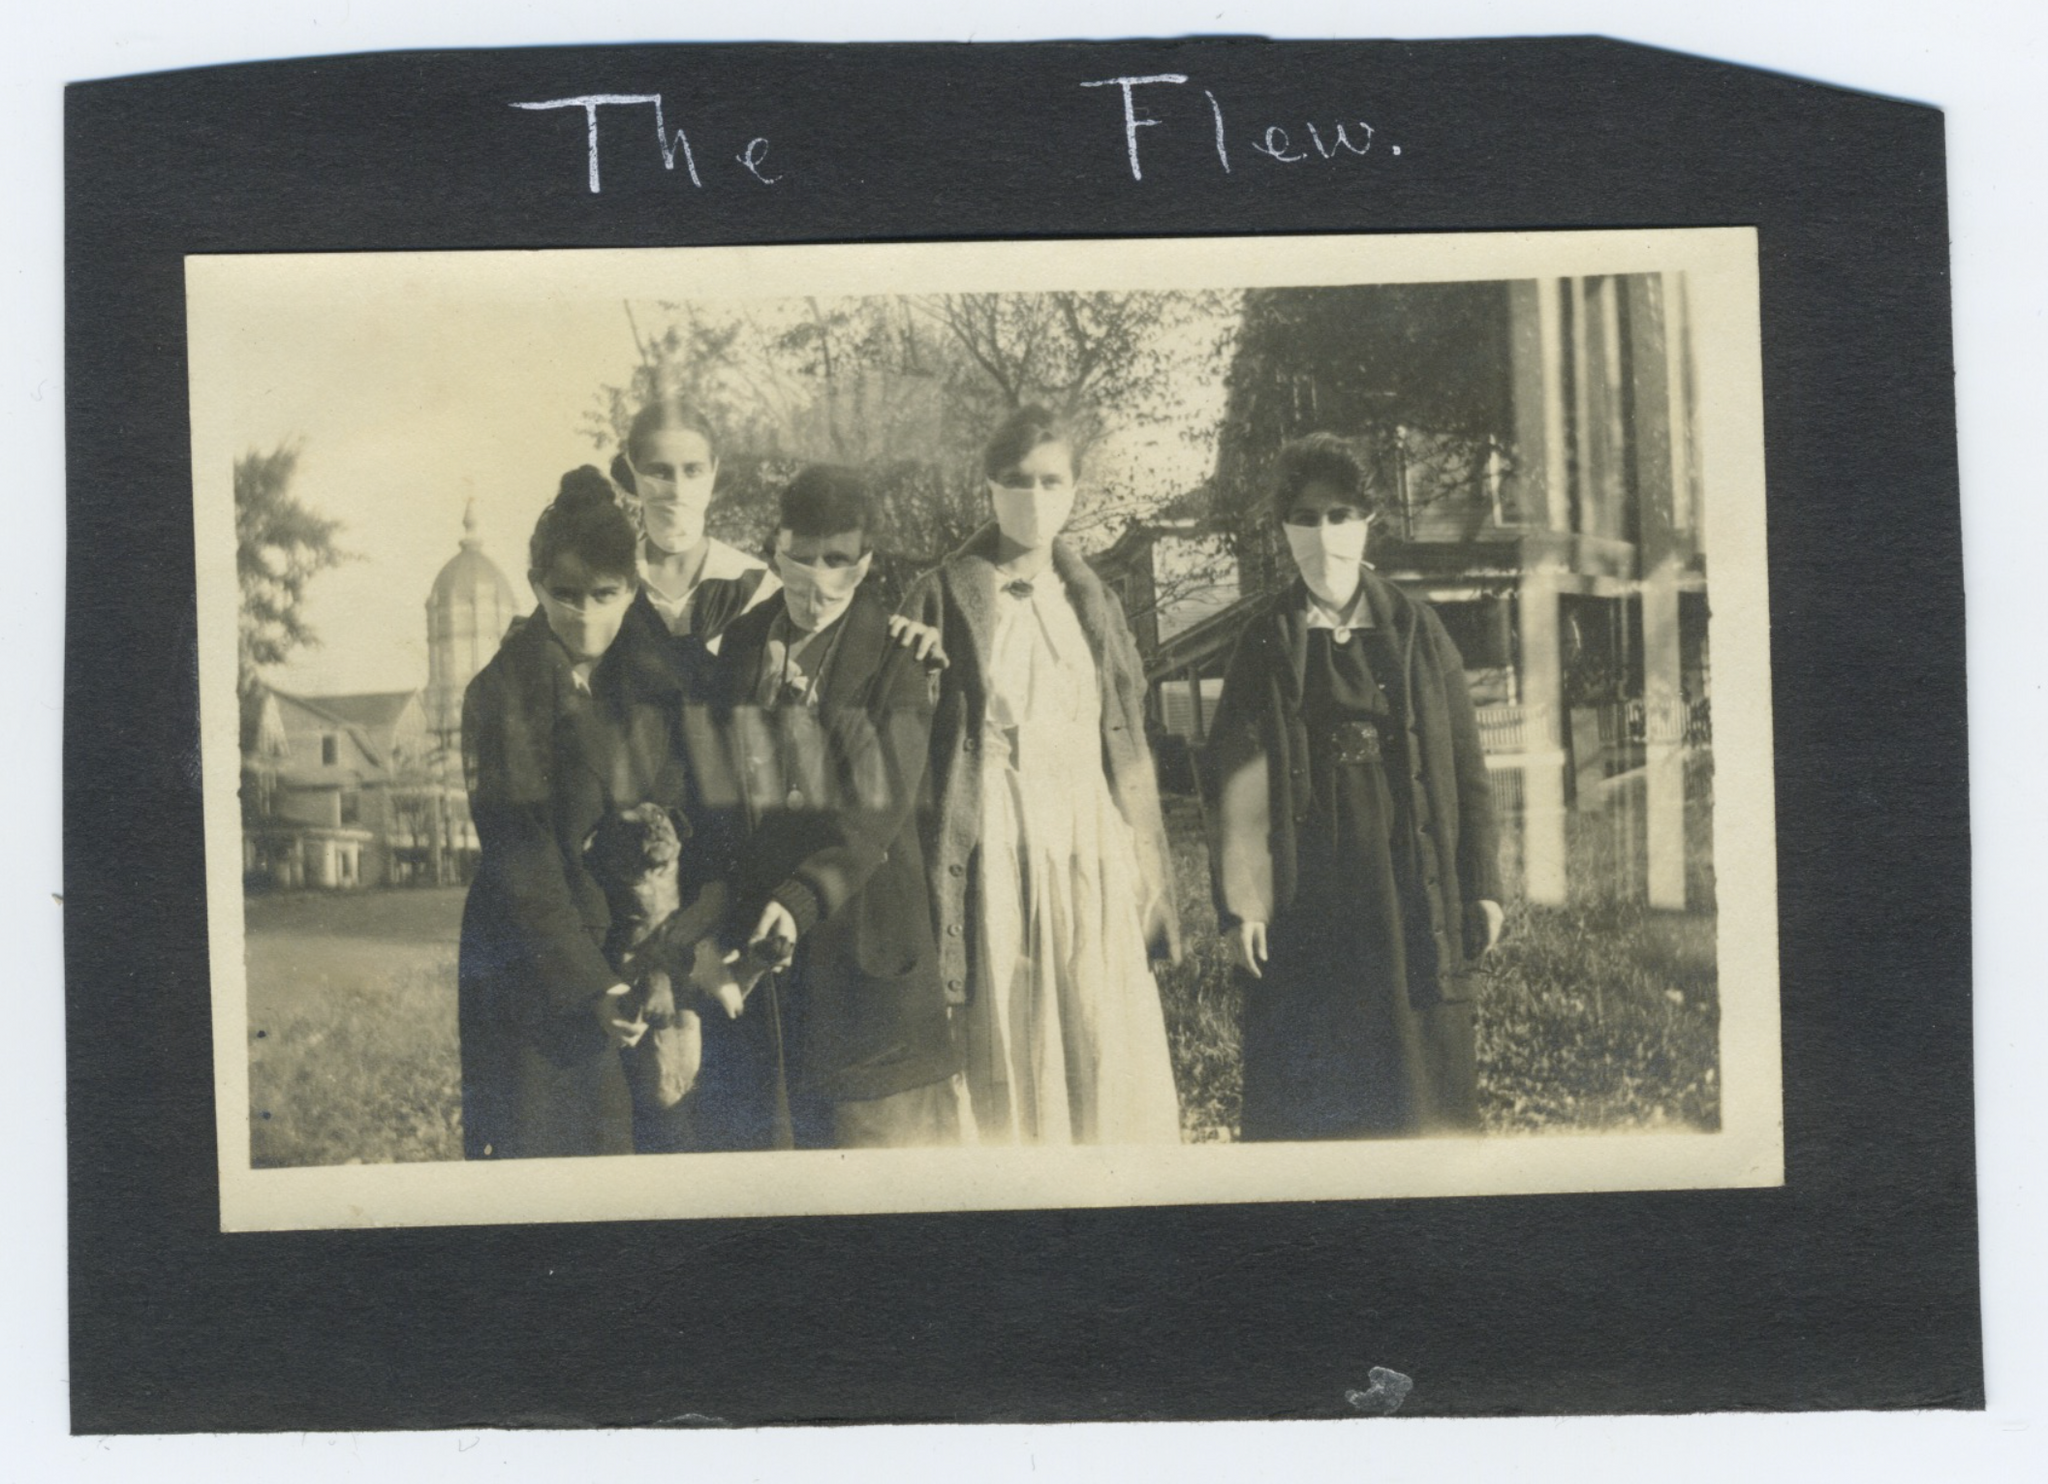 [Spanish Flu] Candid Photograph of Students Wearing Masks, inscribed “The Flew,” University of Missouri, 1918